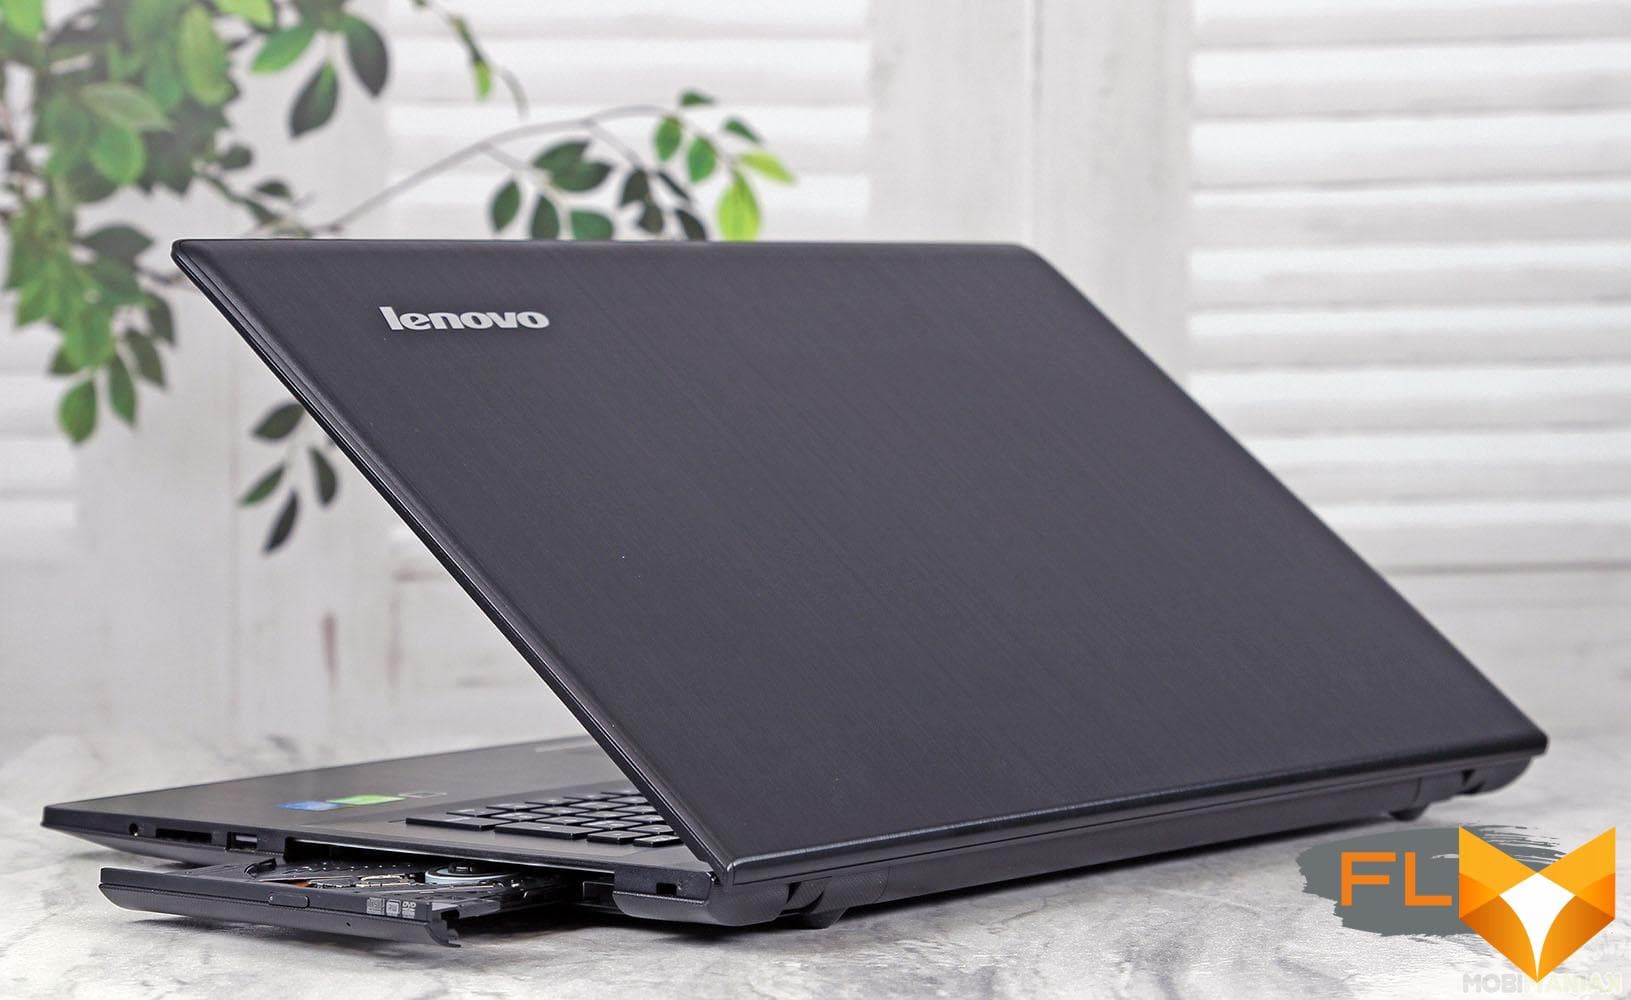 How to Turn off Lenovo Laptop